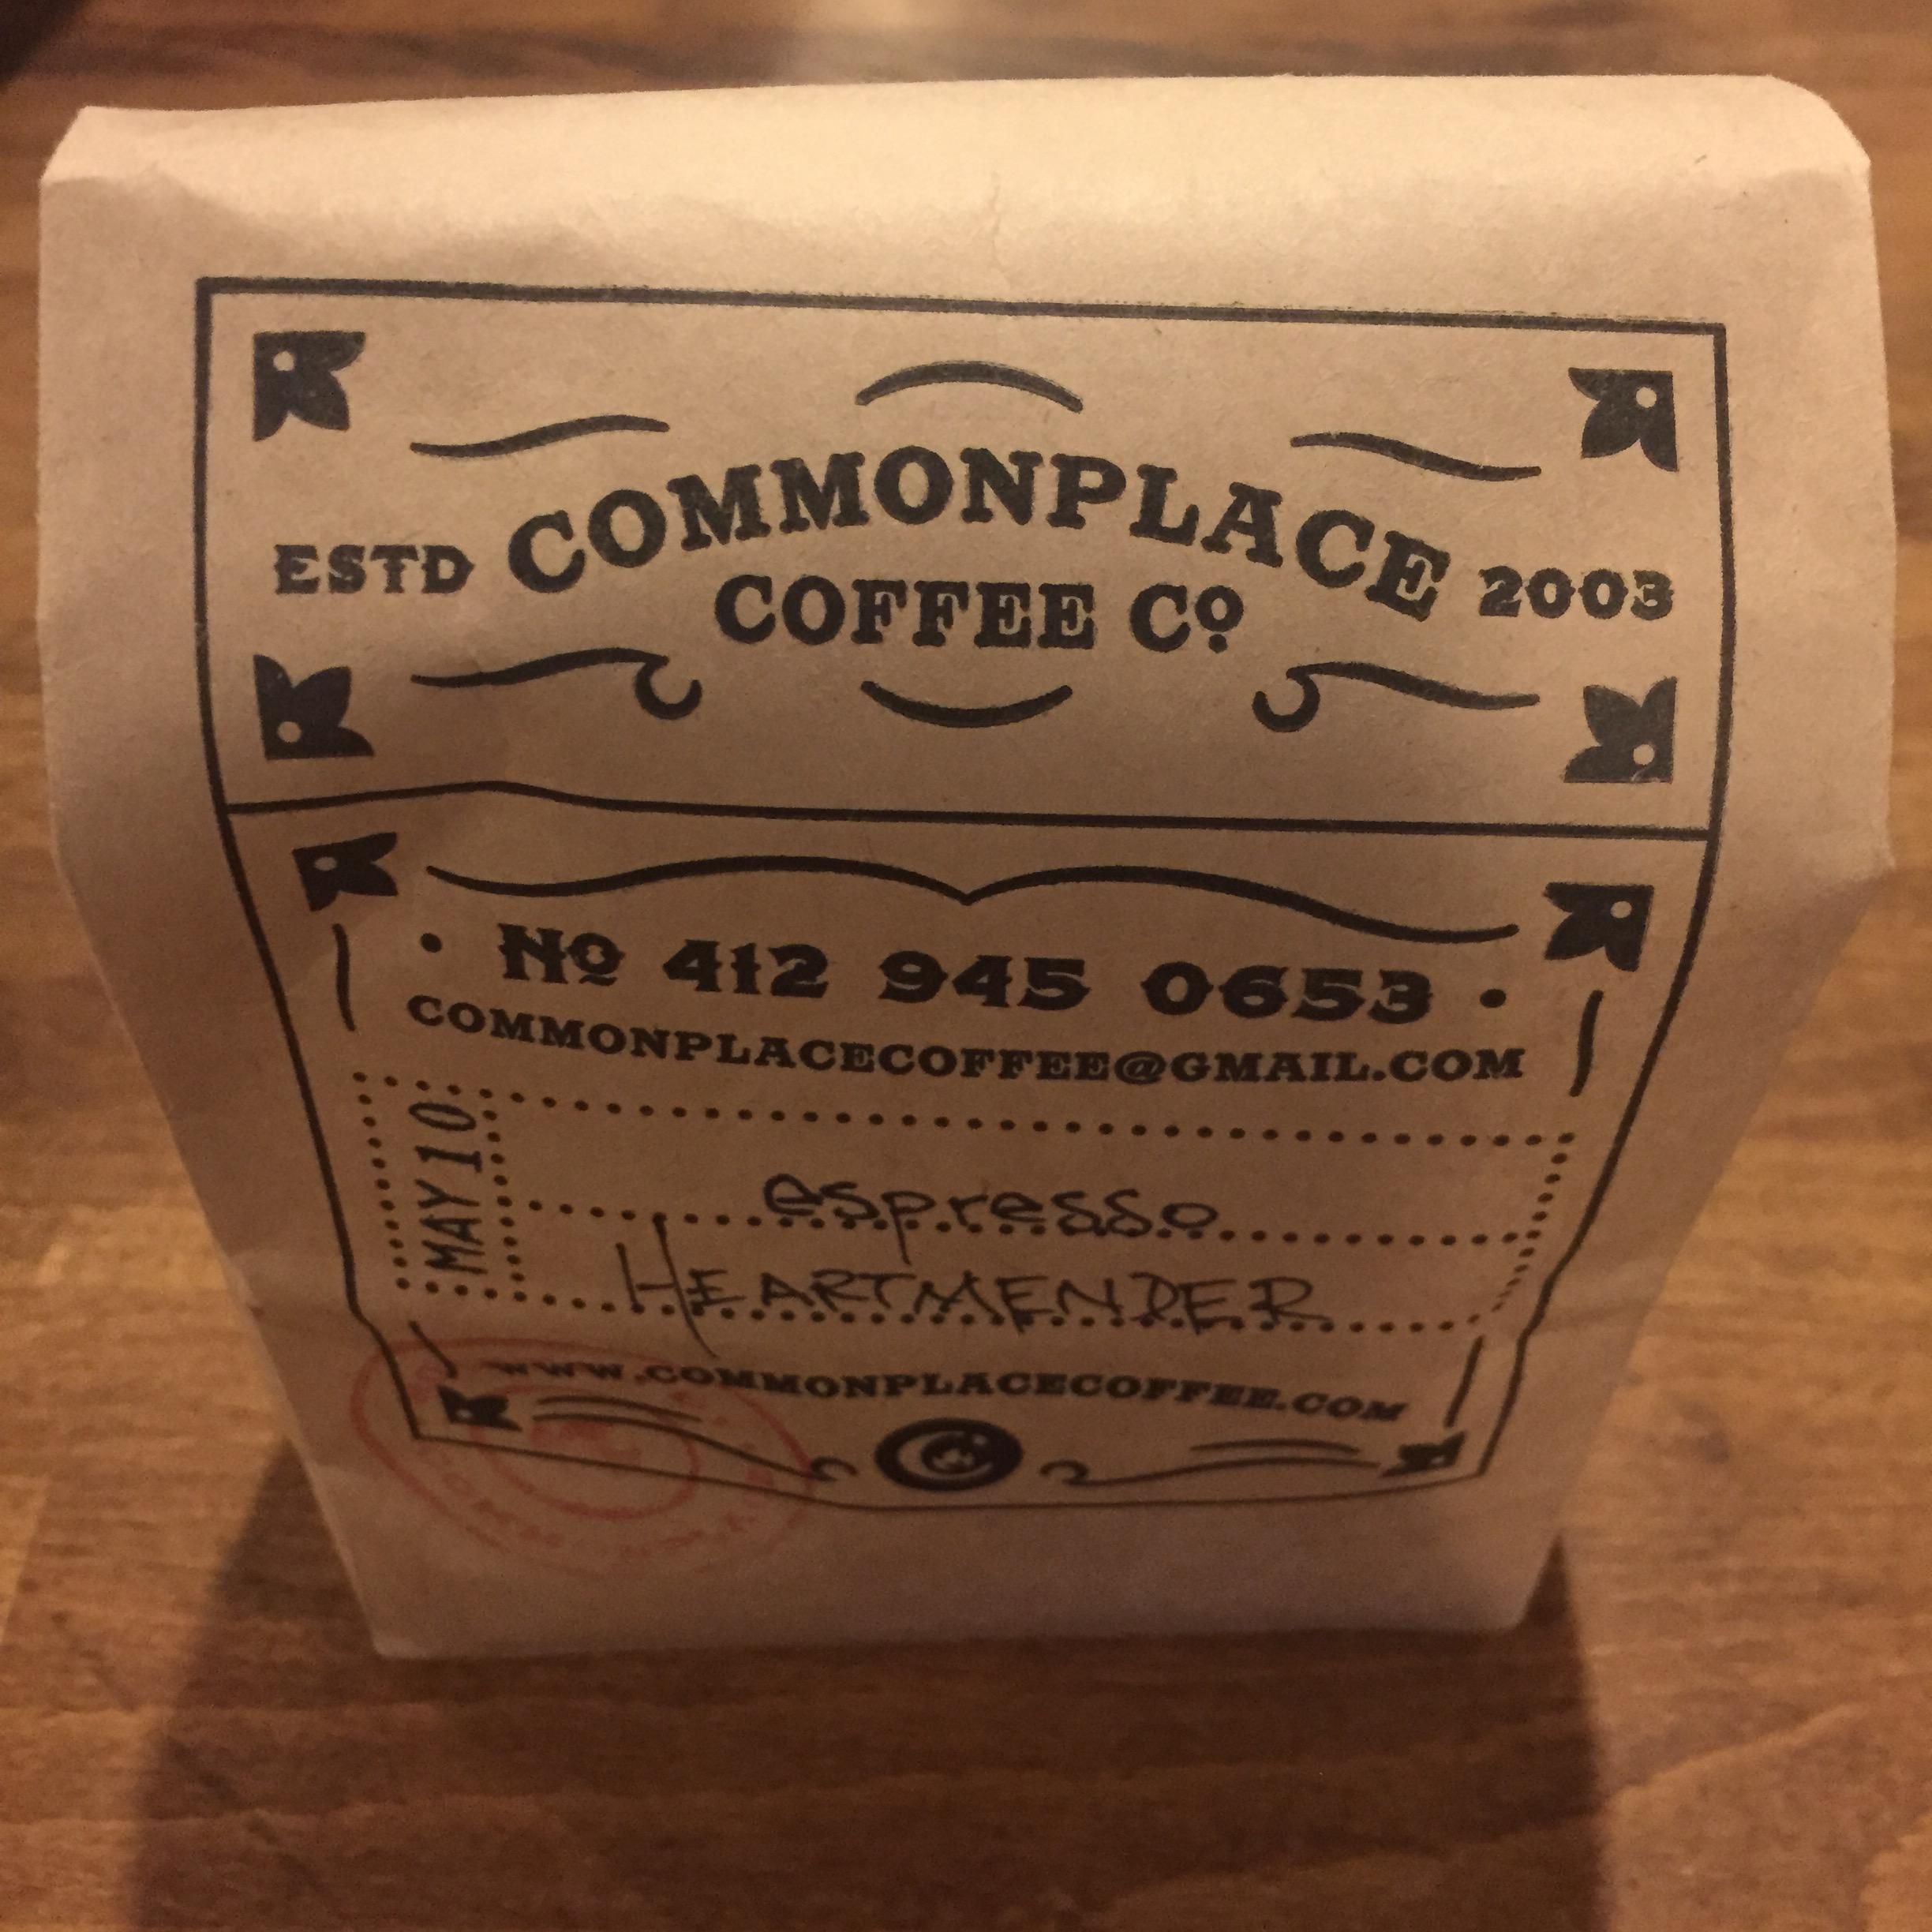 Cover image of this place Commonplace Coffee Co.